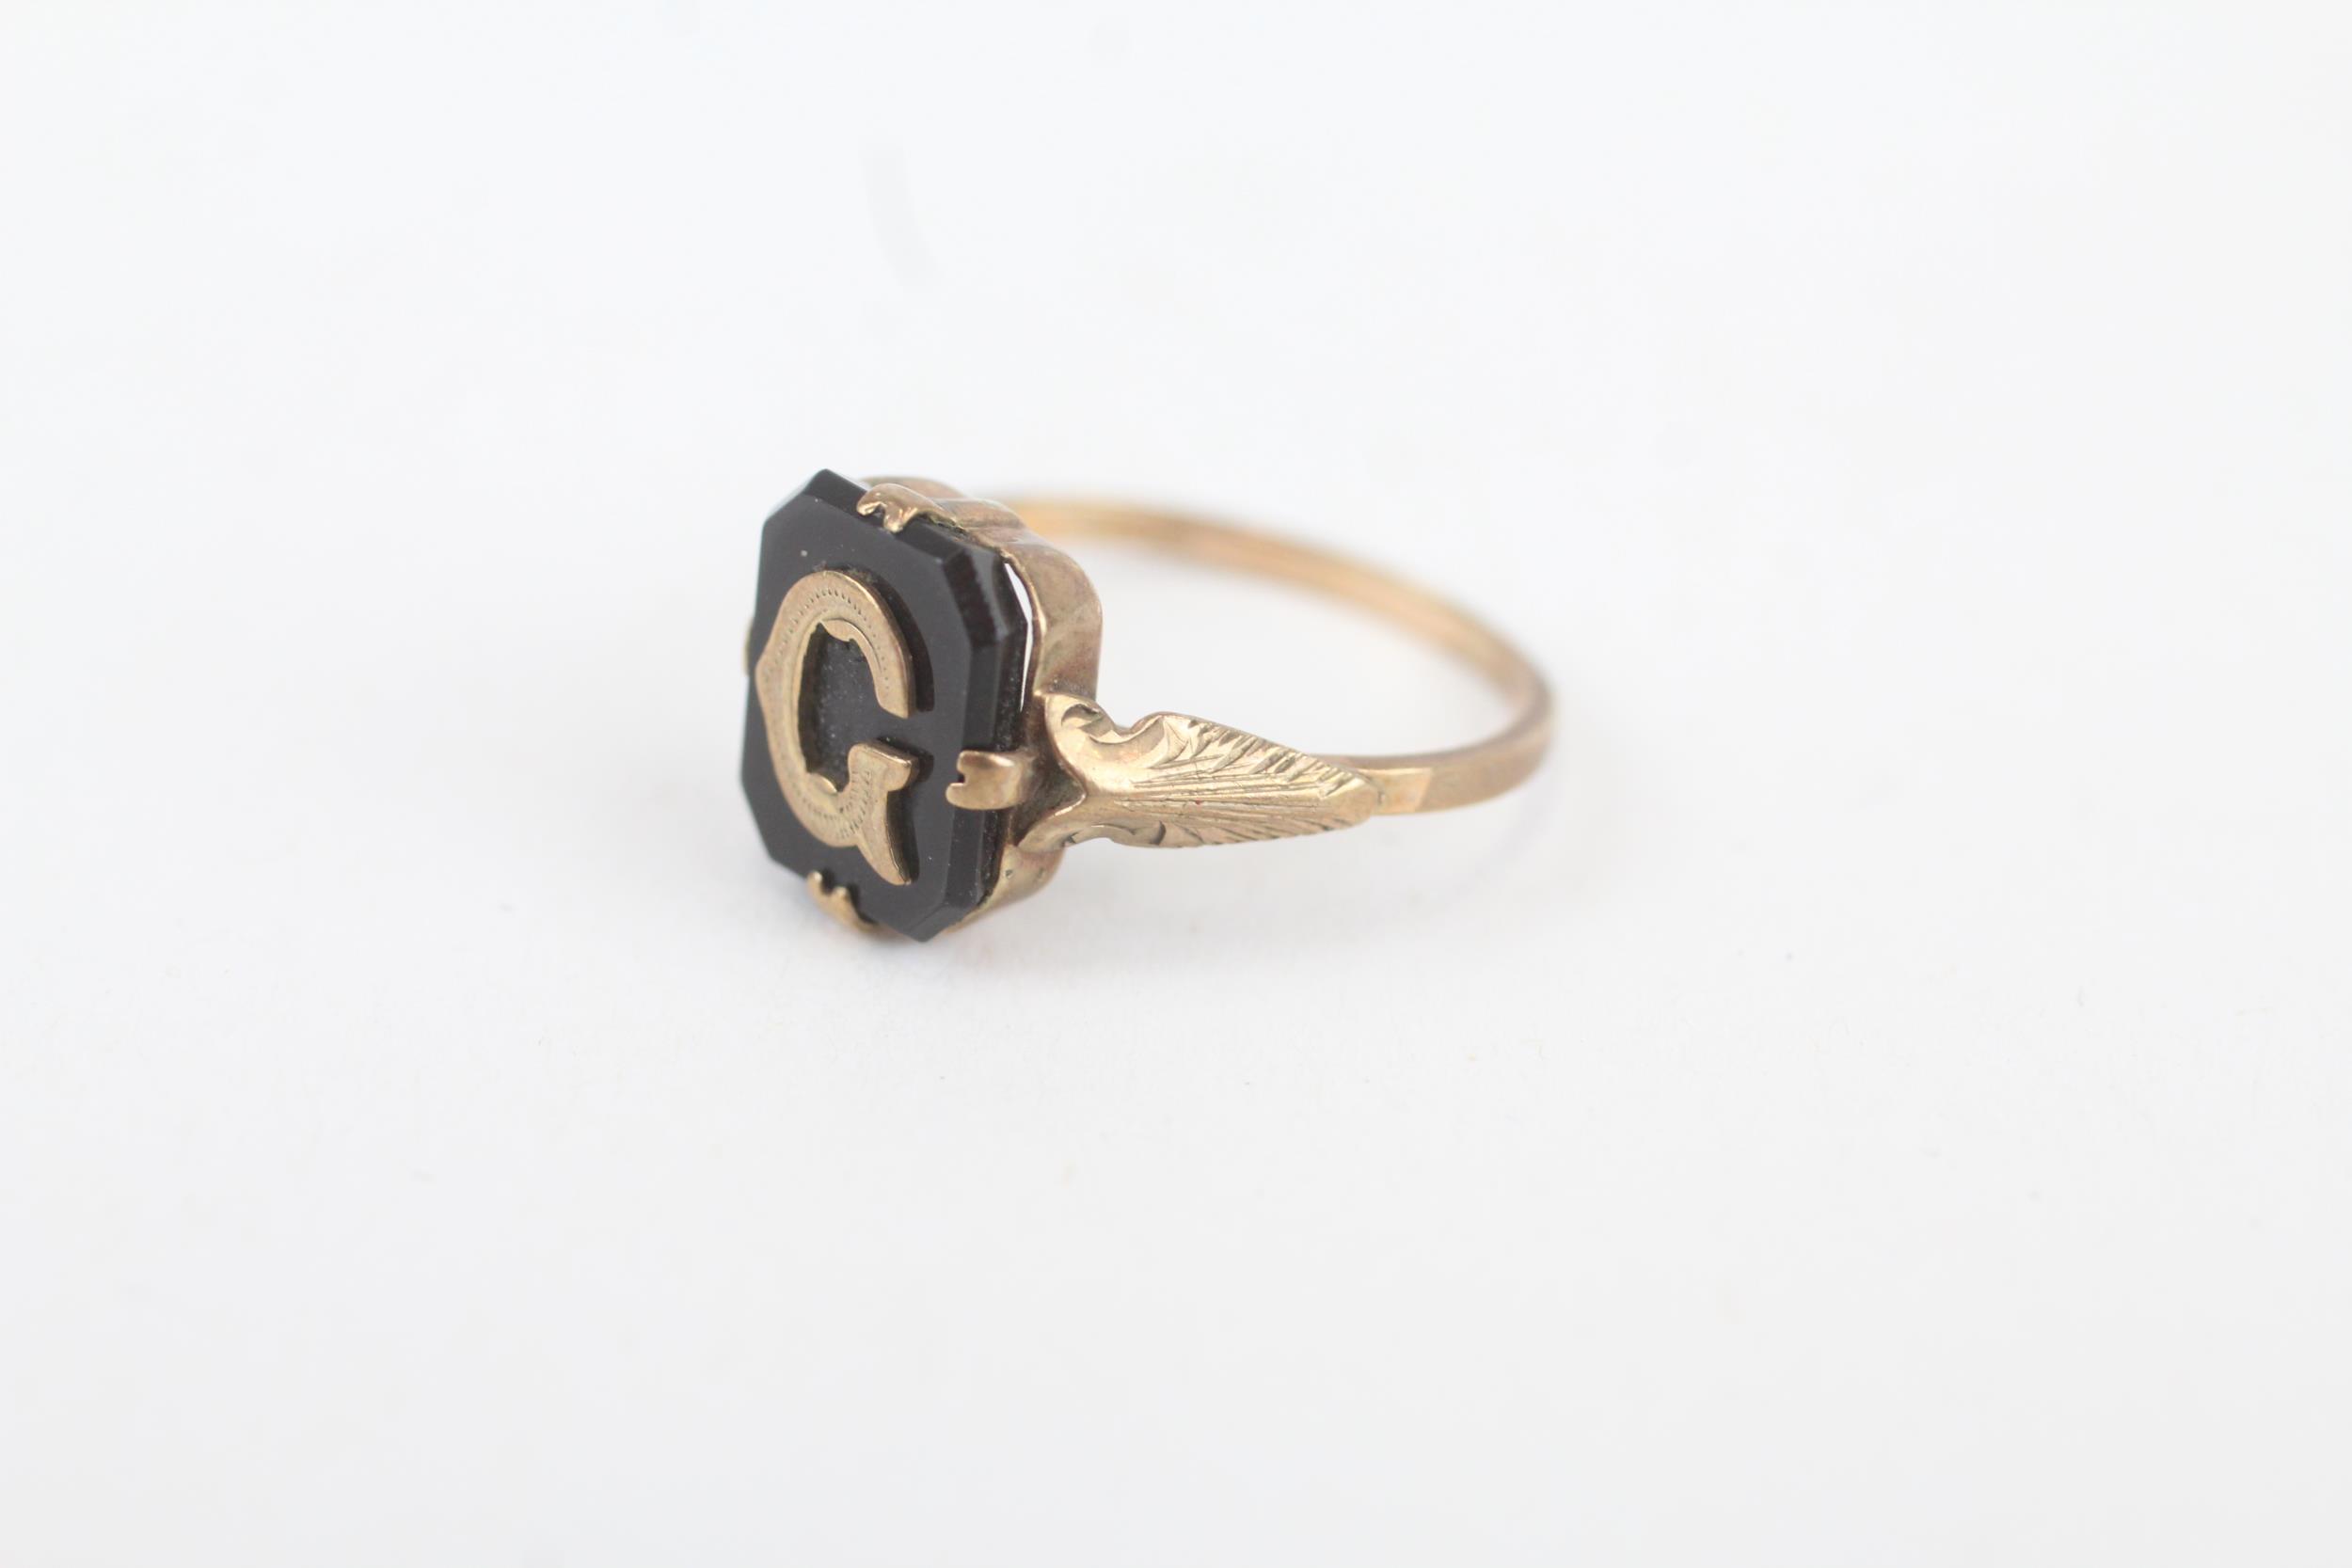 9ct gold antique onyx initial 'G' signet ring - MISHAPEN - AS SEEN Size J 1.6 g - Image 3 of 4